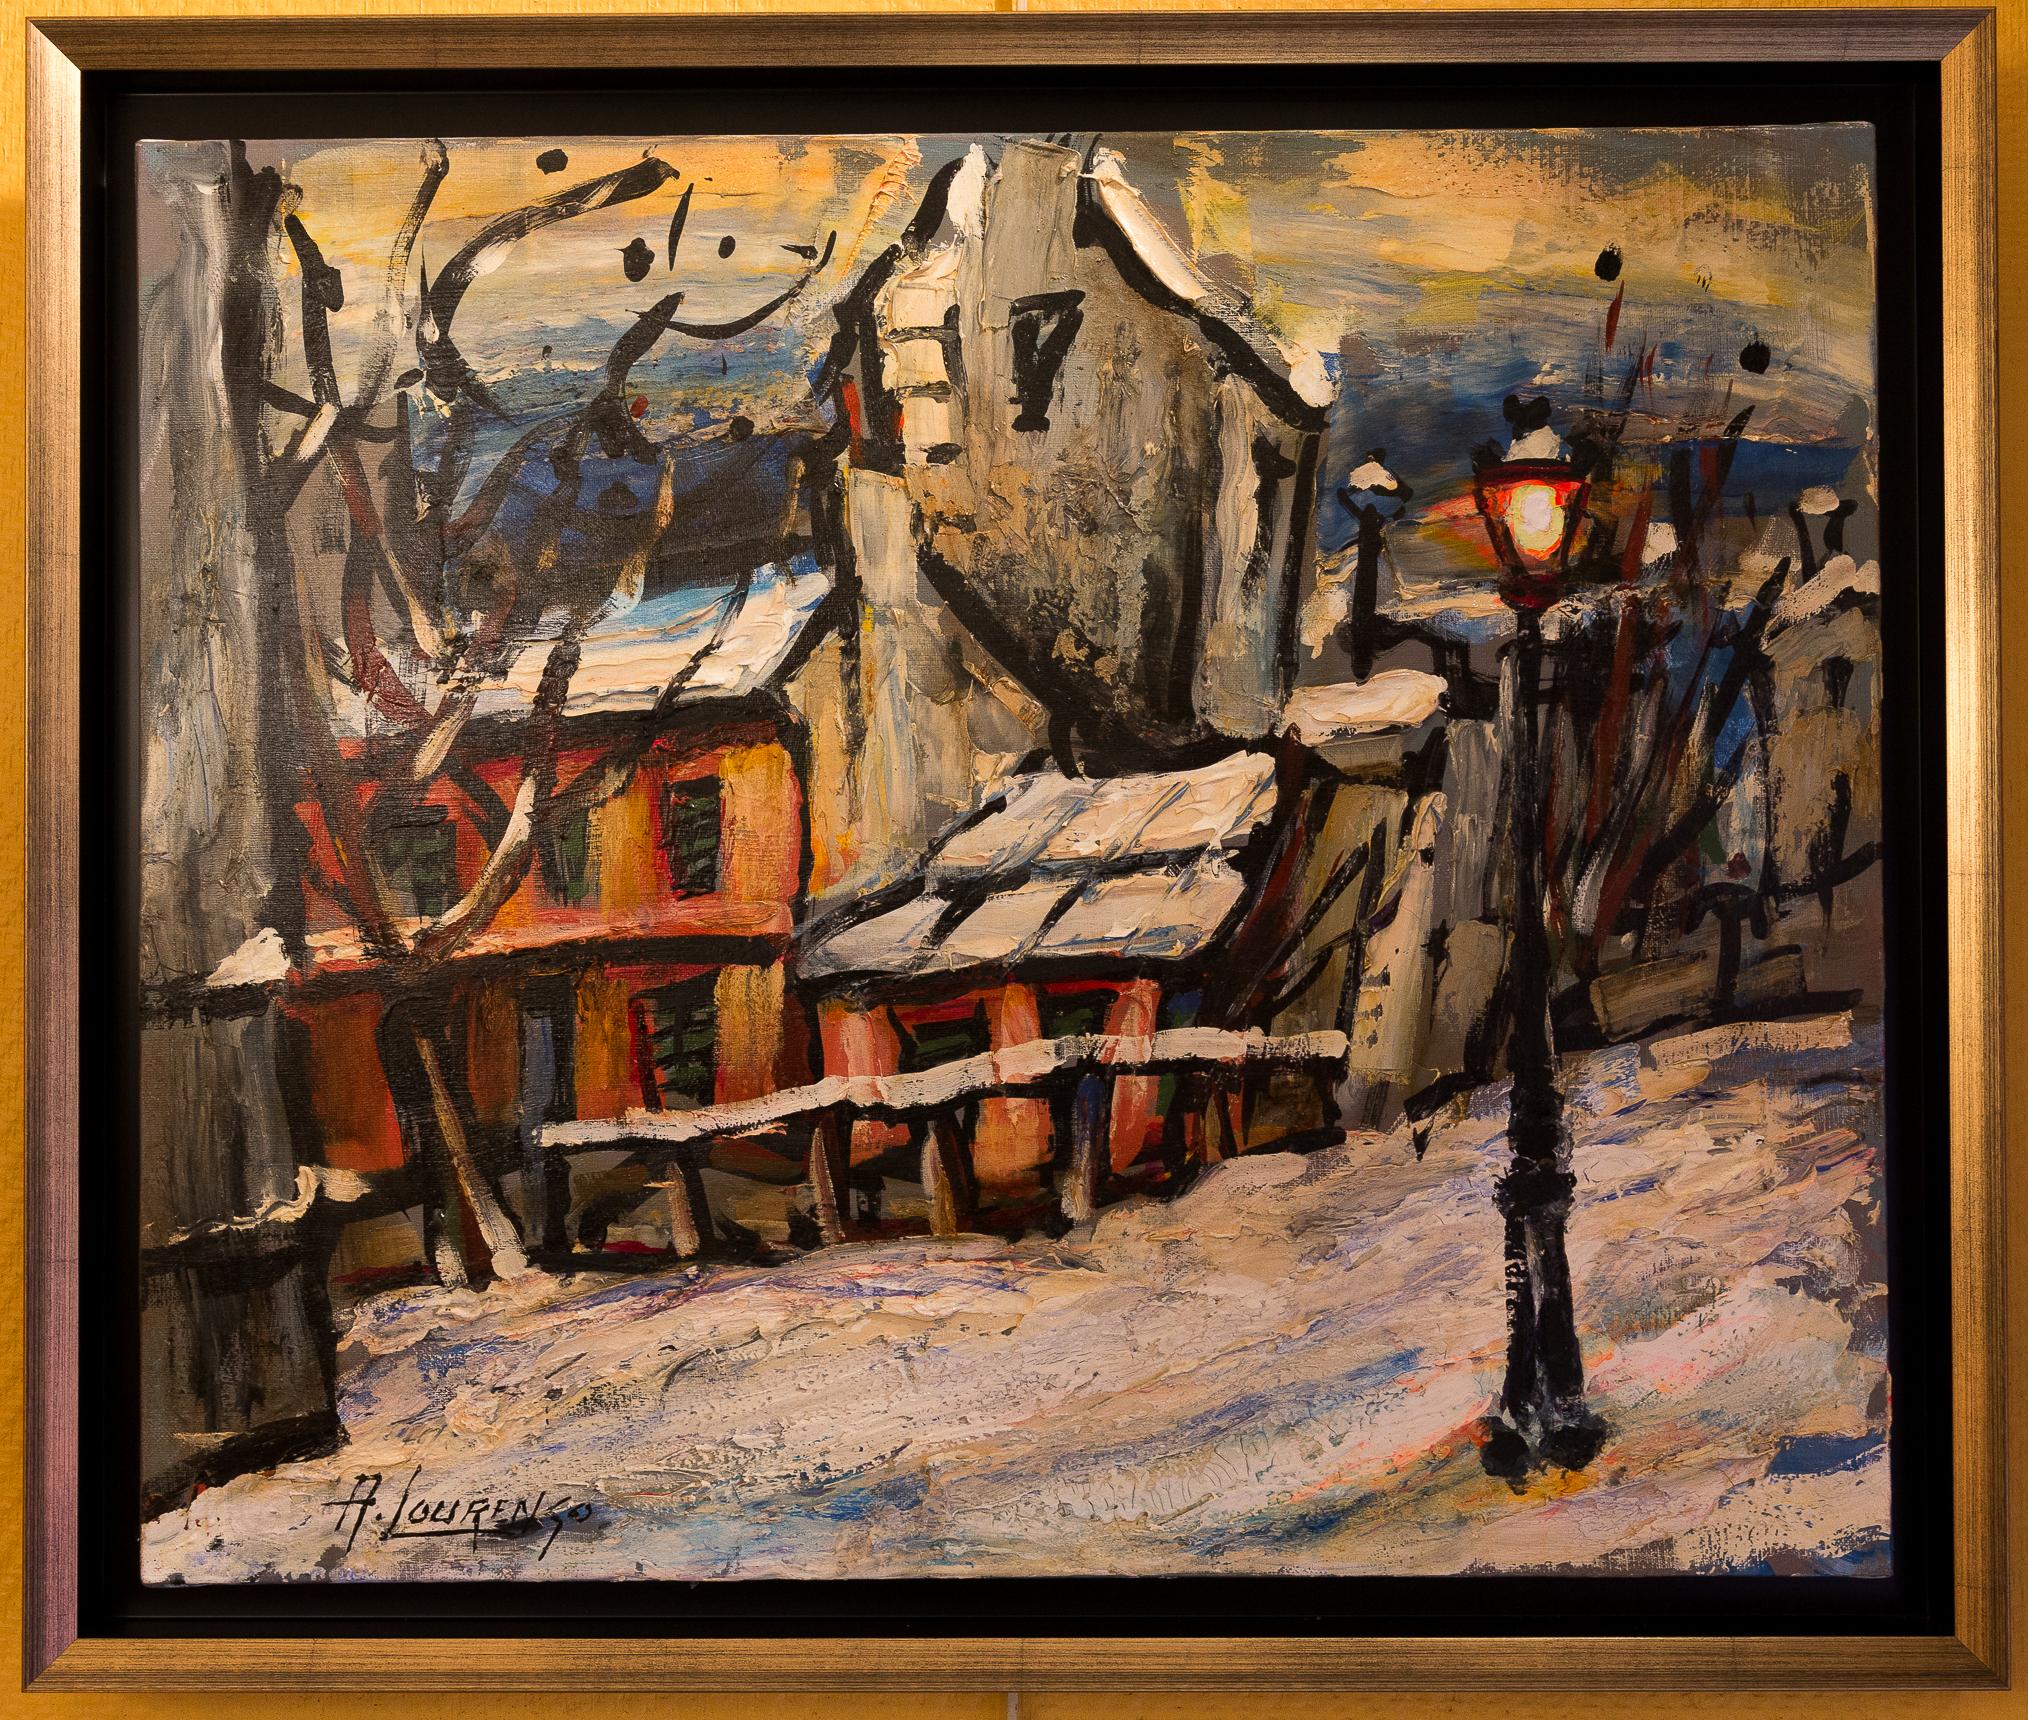 An interesting and decorative oil on canvas depicting The Montmartre, circa 1920s Le Lapin Agile. Lapin Agile is a famous Montmartre Cabaret at Rue des Saules 22. It is a favorite spot for Picasso, Modigliani, Apollinaire, and Utrillo.

Armand